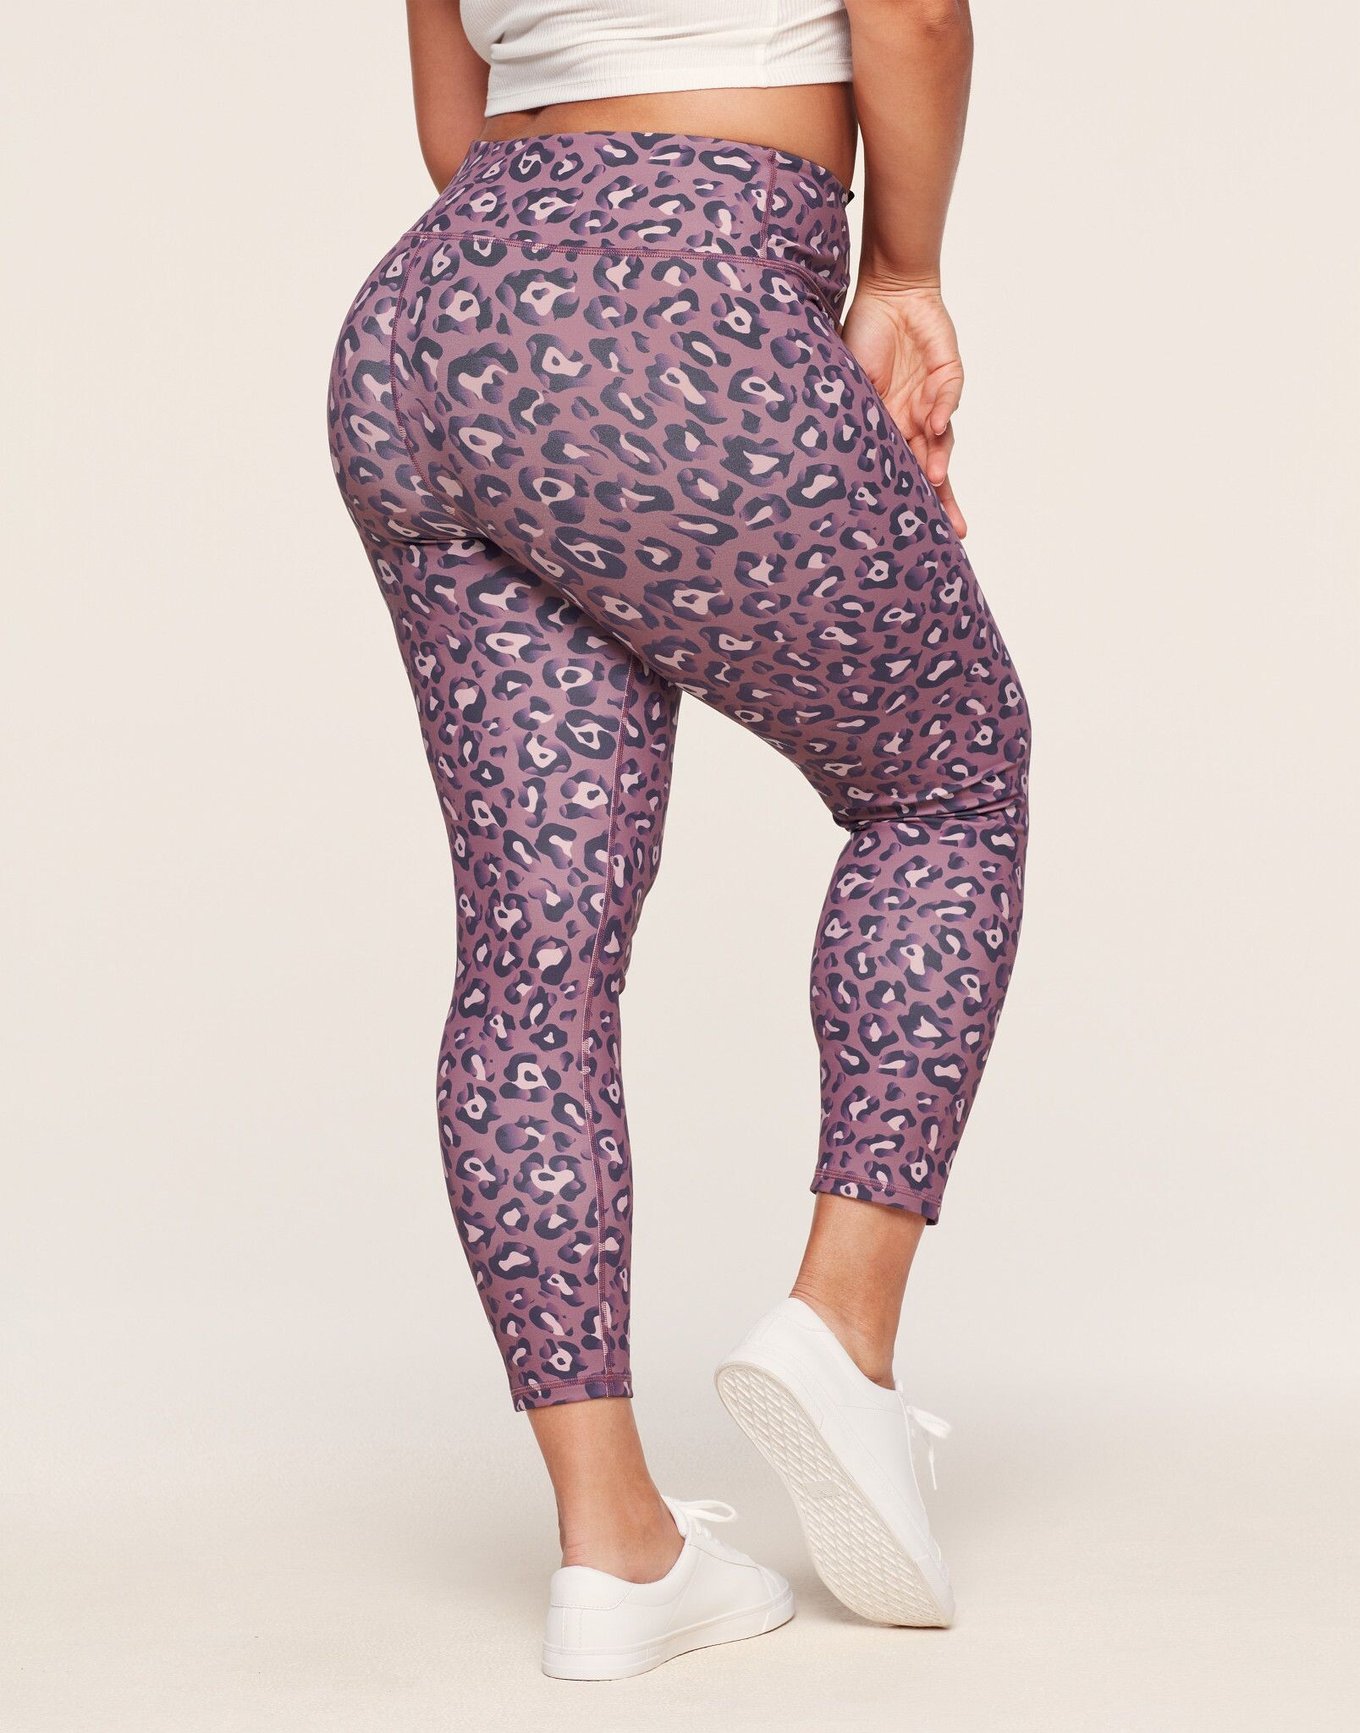 Fabletics Women's XS High Waisted Leggings Floral Print : r